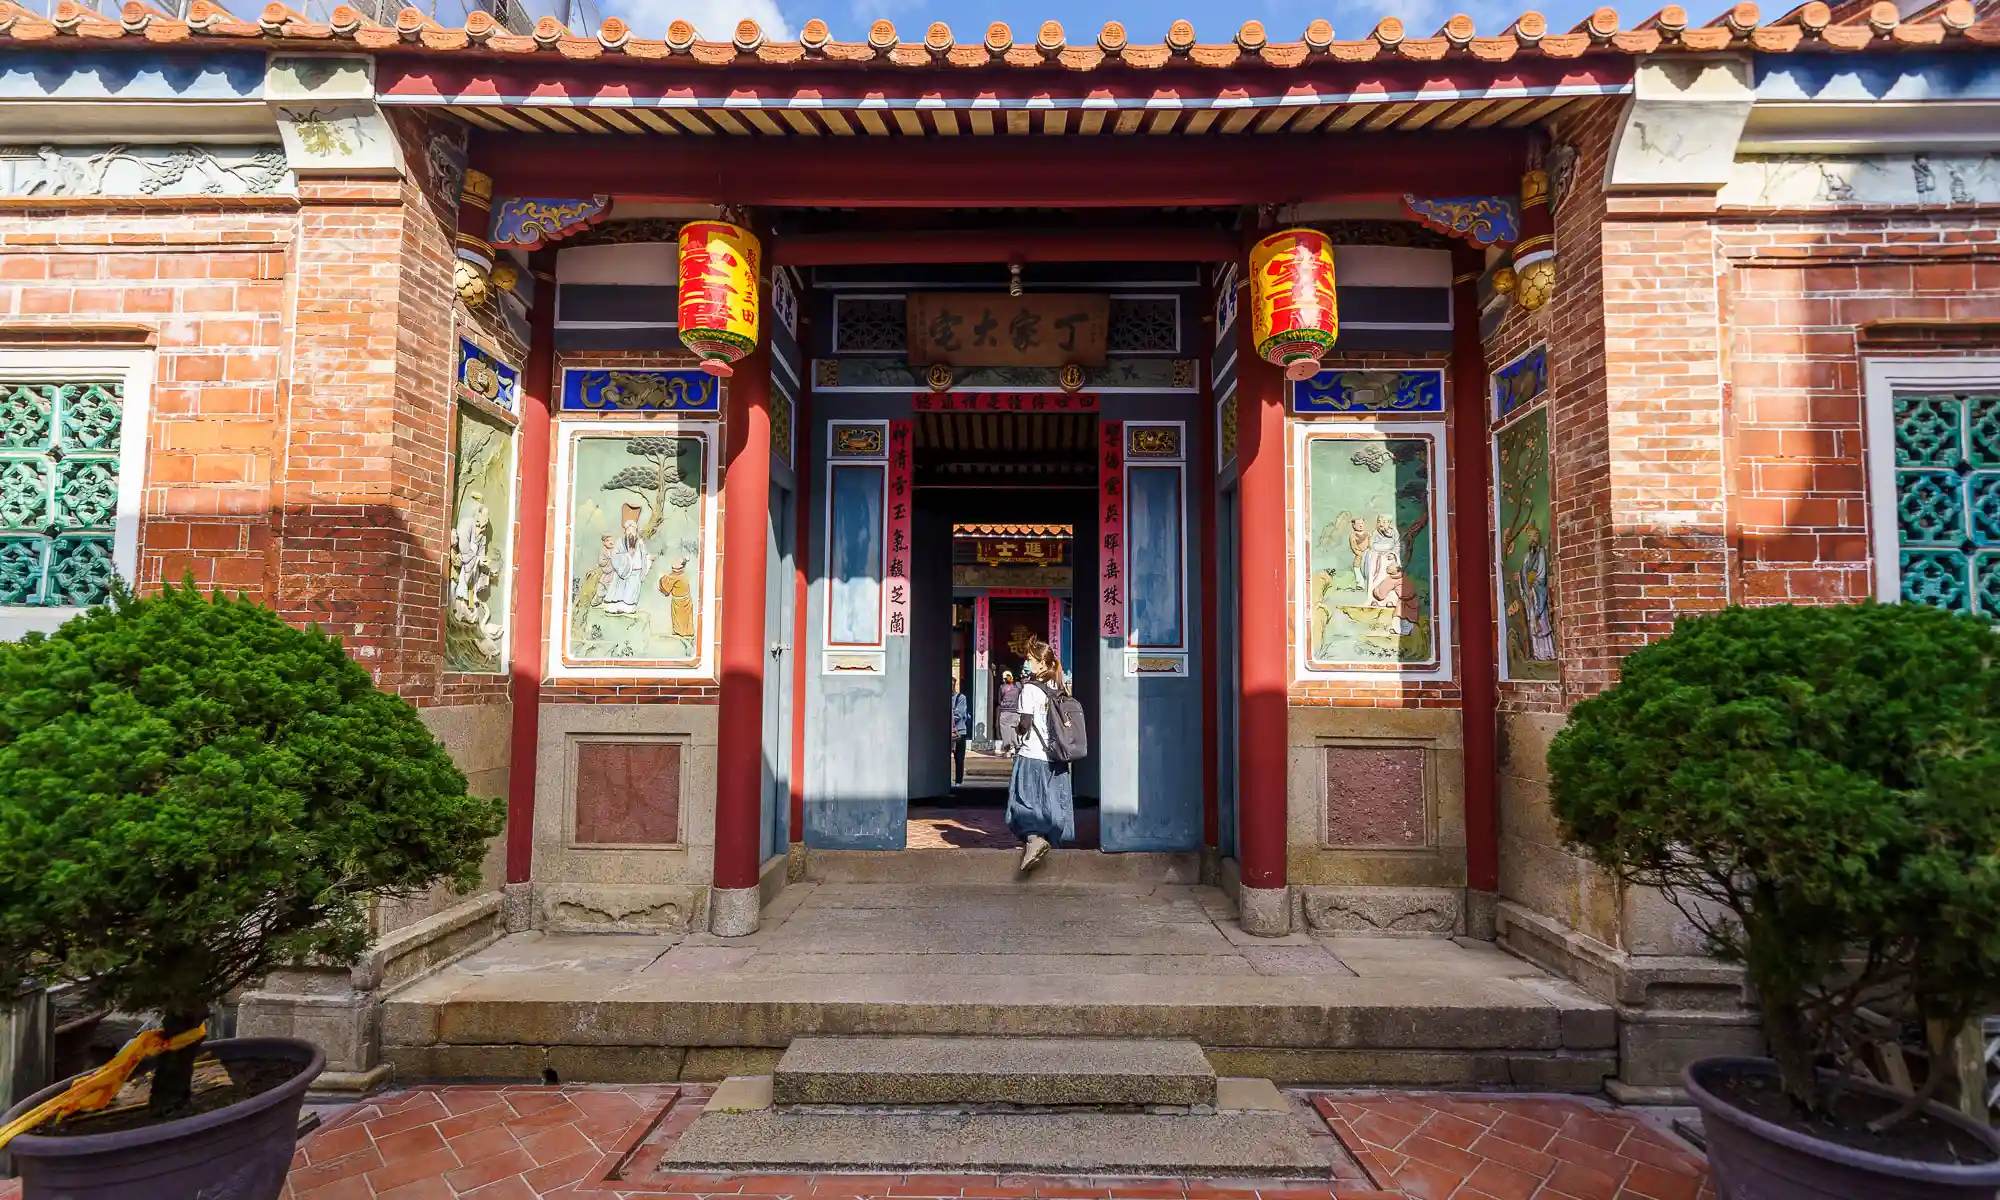 The colorful front facade of the Dingjia Residence historic building.